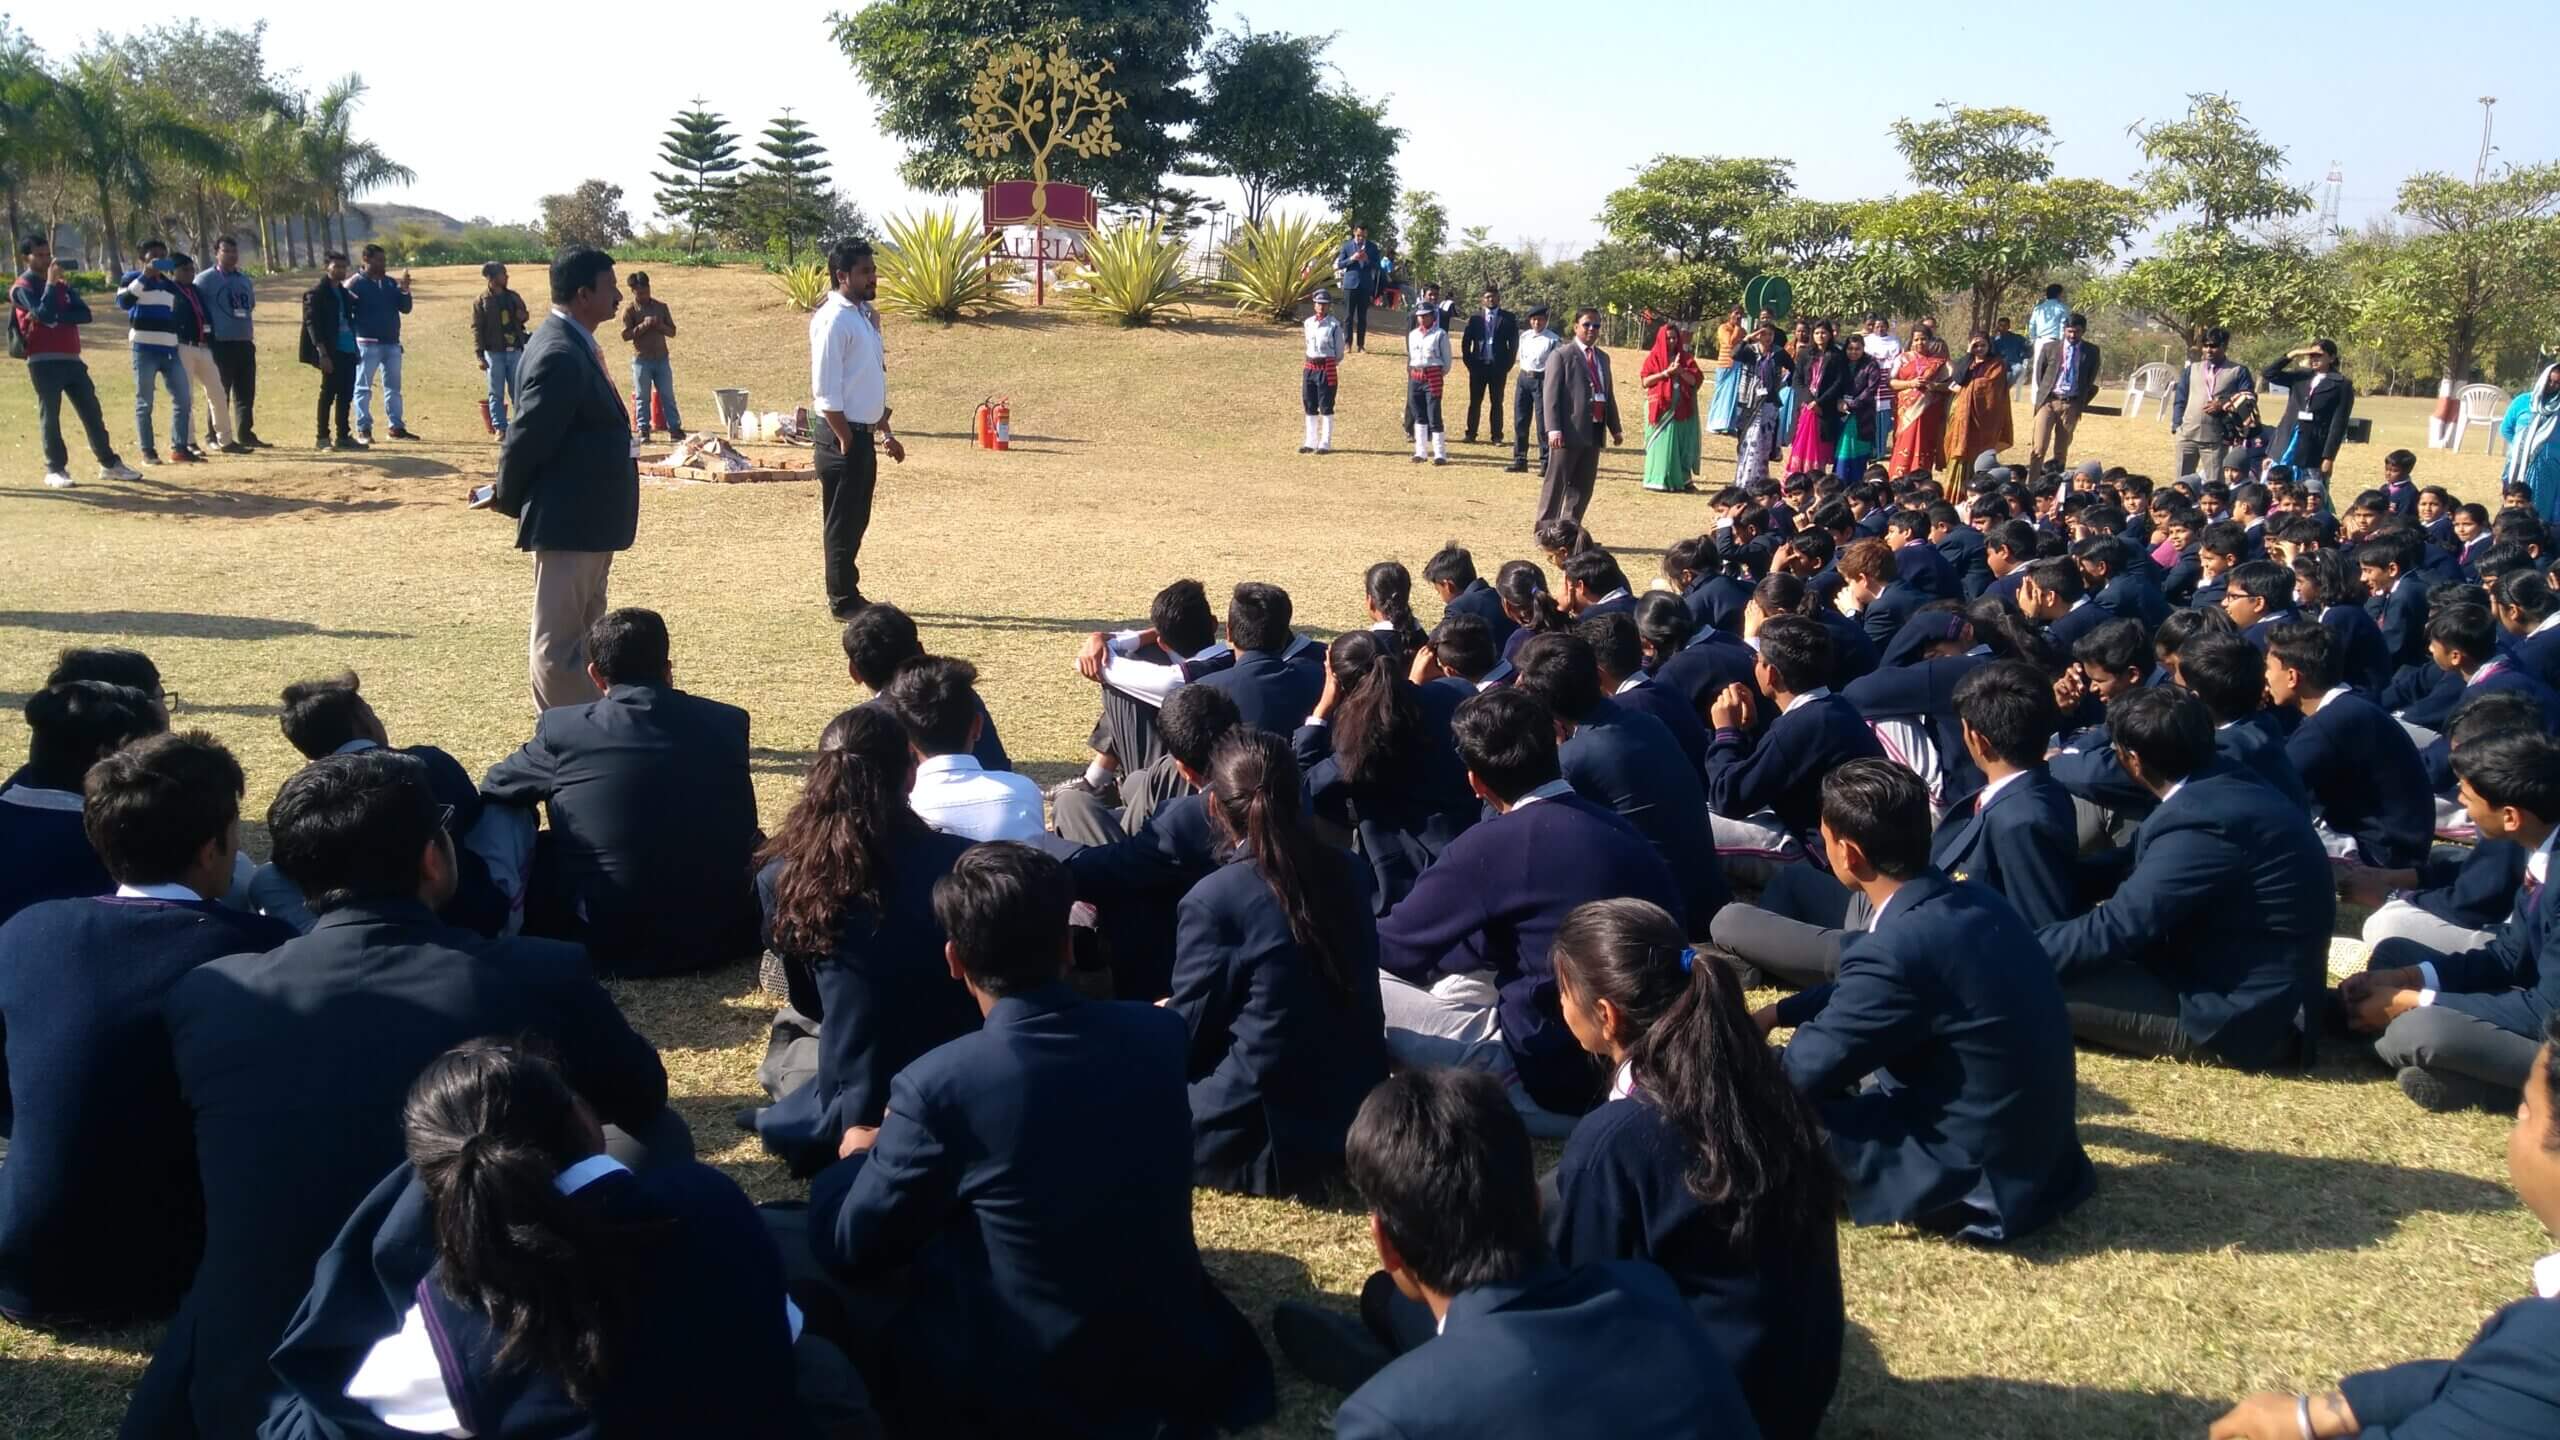 Mock Fire Drill involving students conducted on 27th January 2018